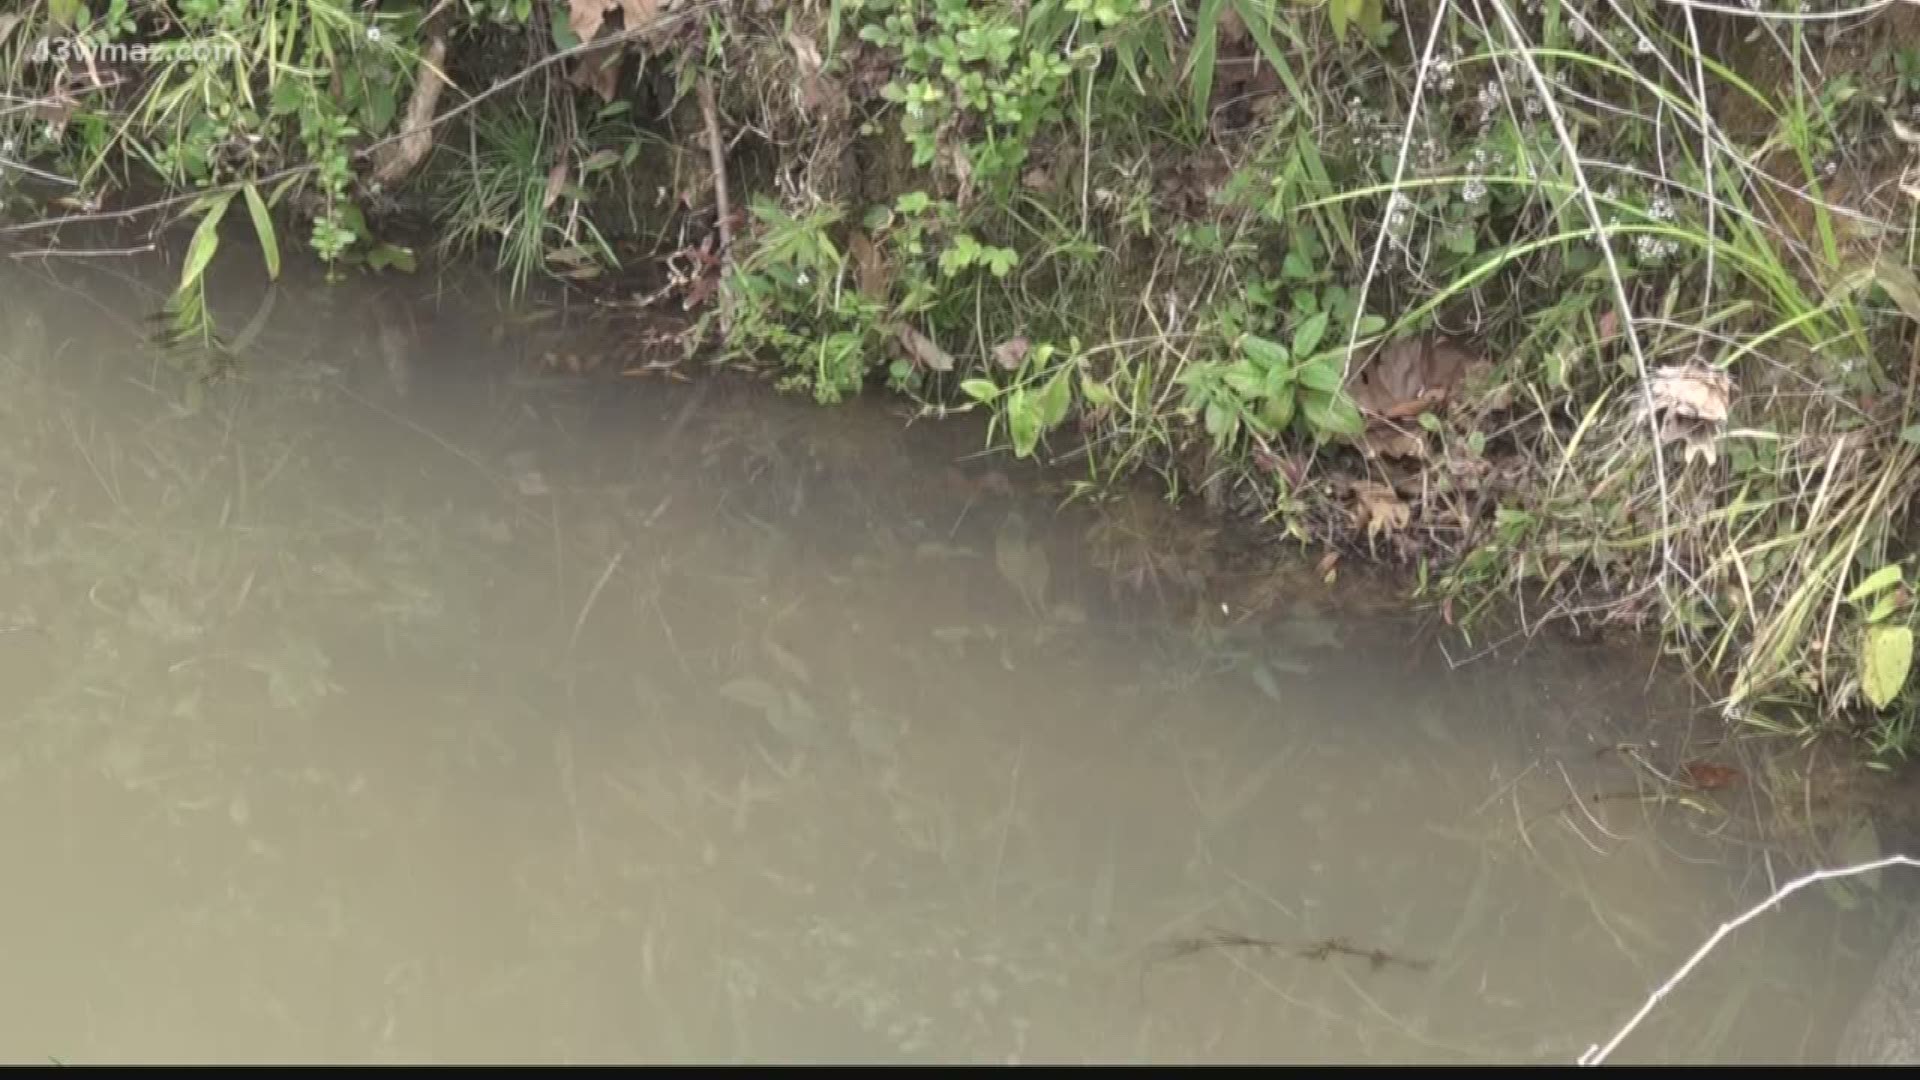 Last week, a fire at the Zschimmer & Schwarz plant released chemicals into Fishing Creek.